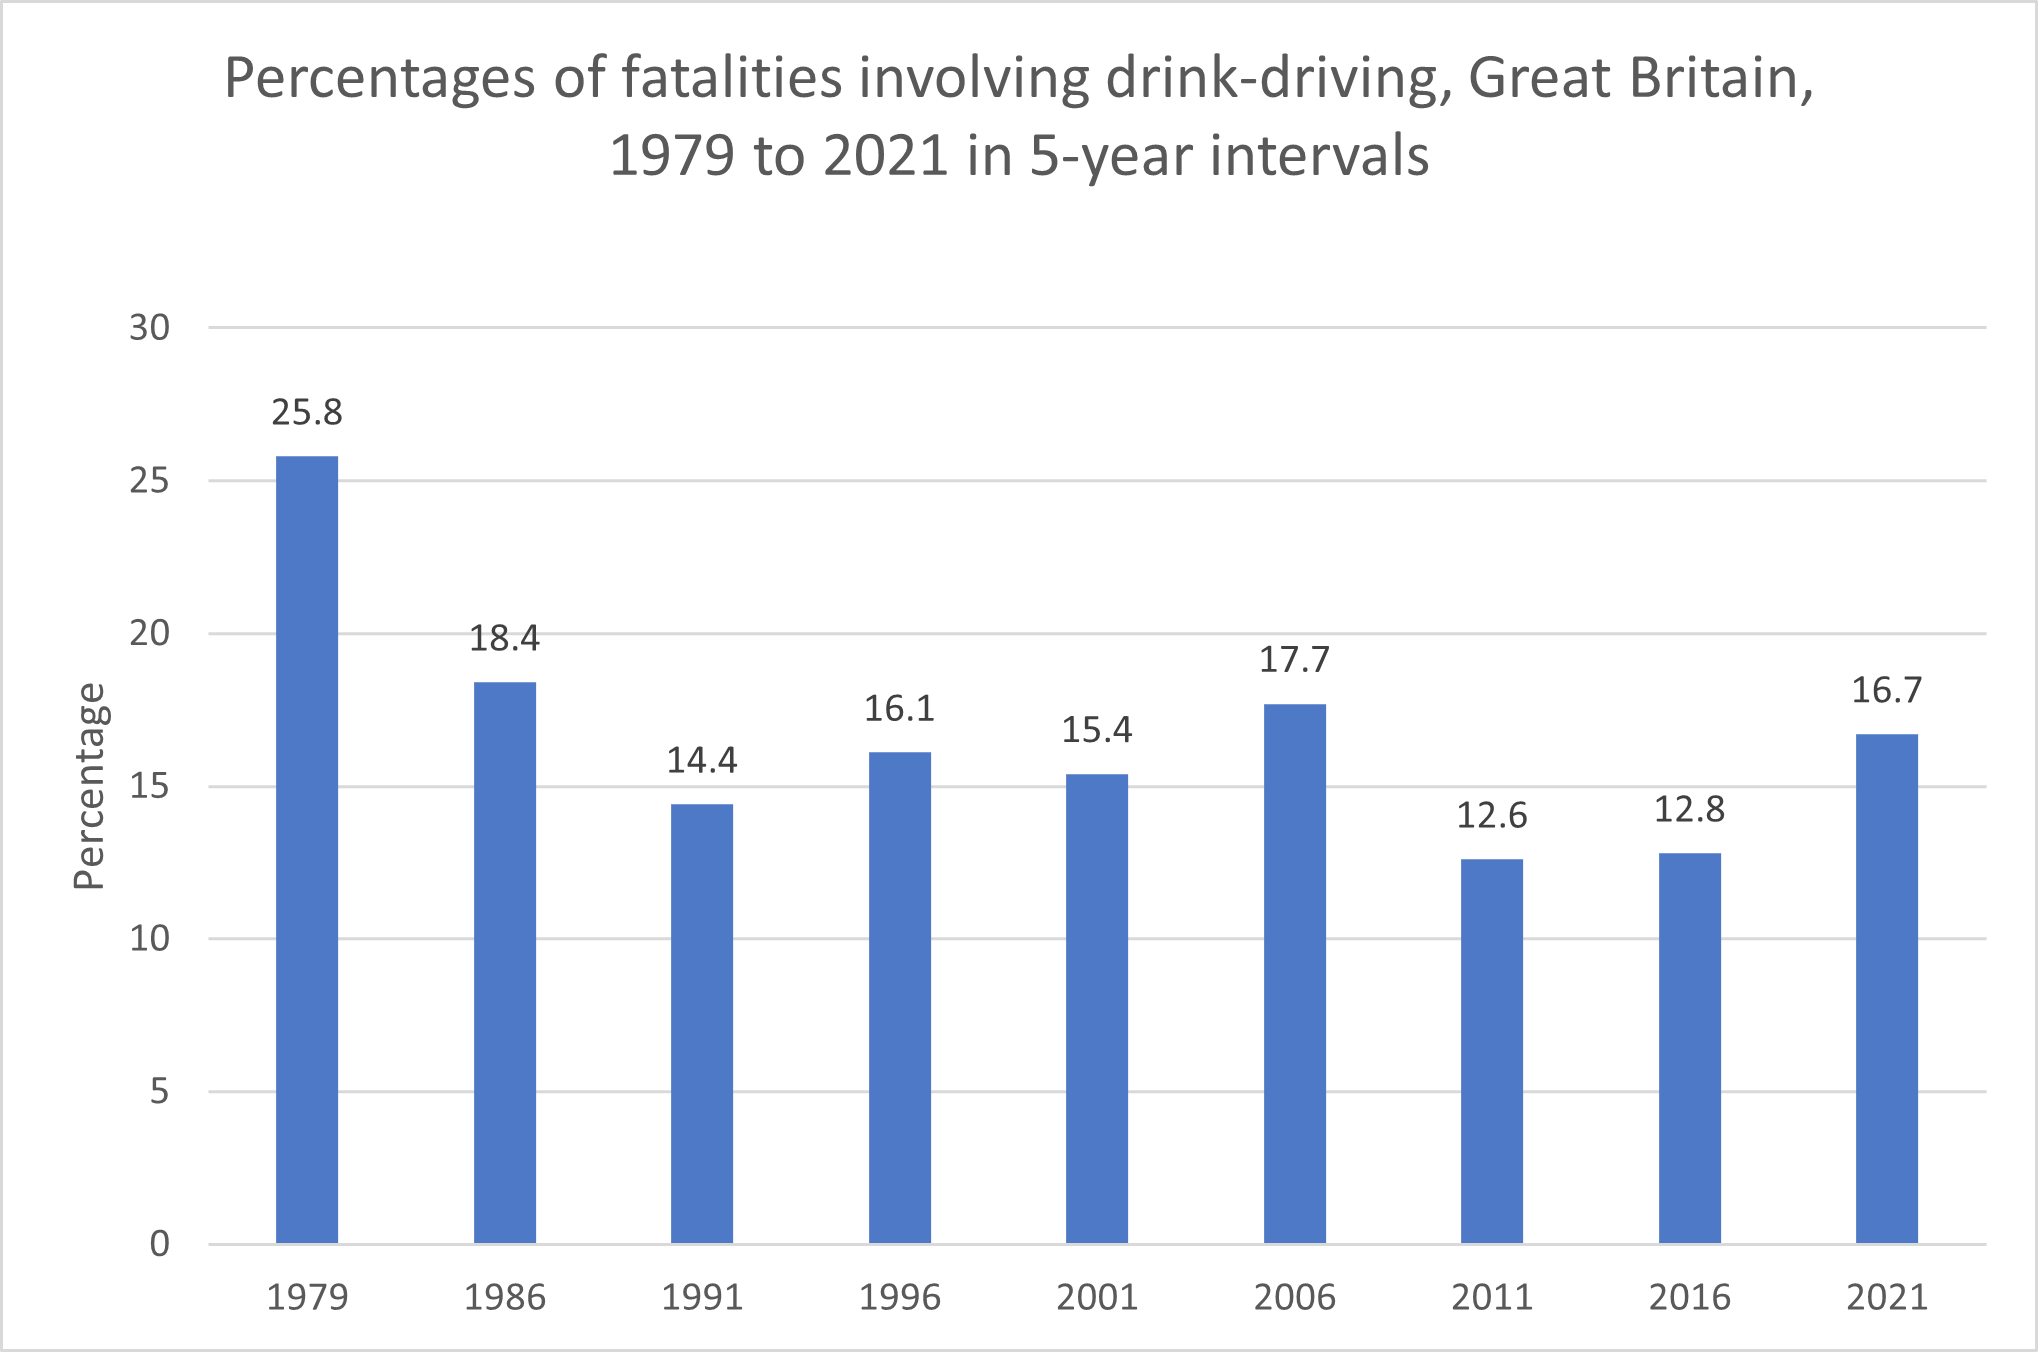 Percentages of fatalities with drink driving